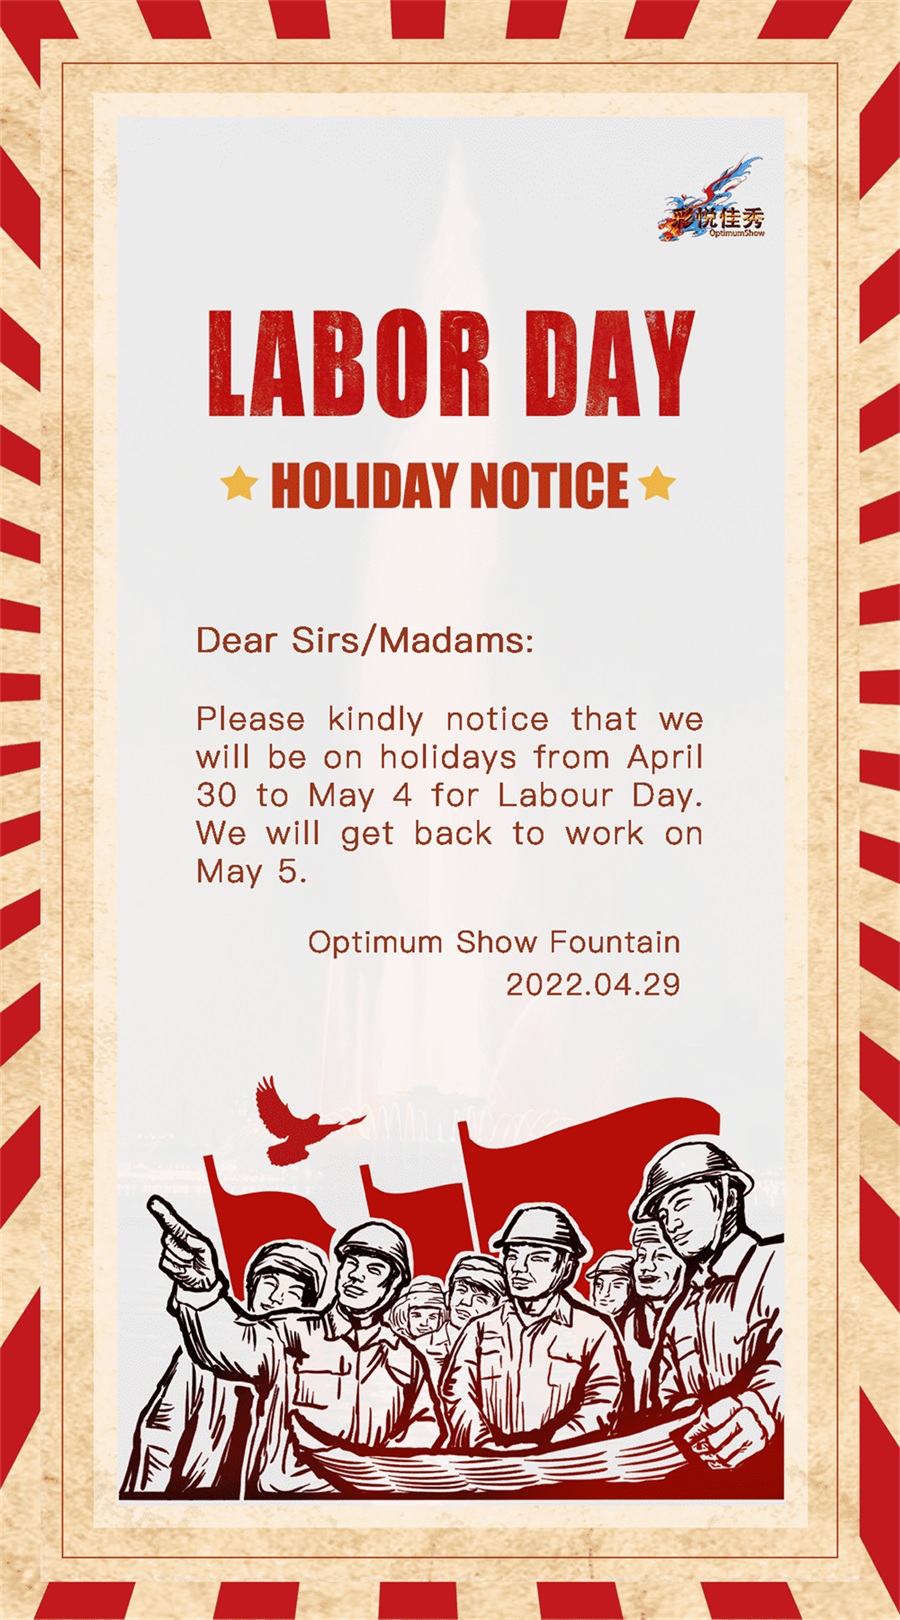 holiday notice for labor day